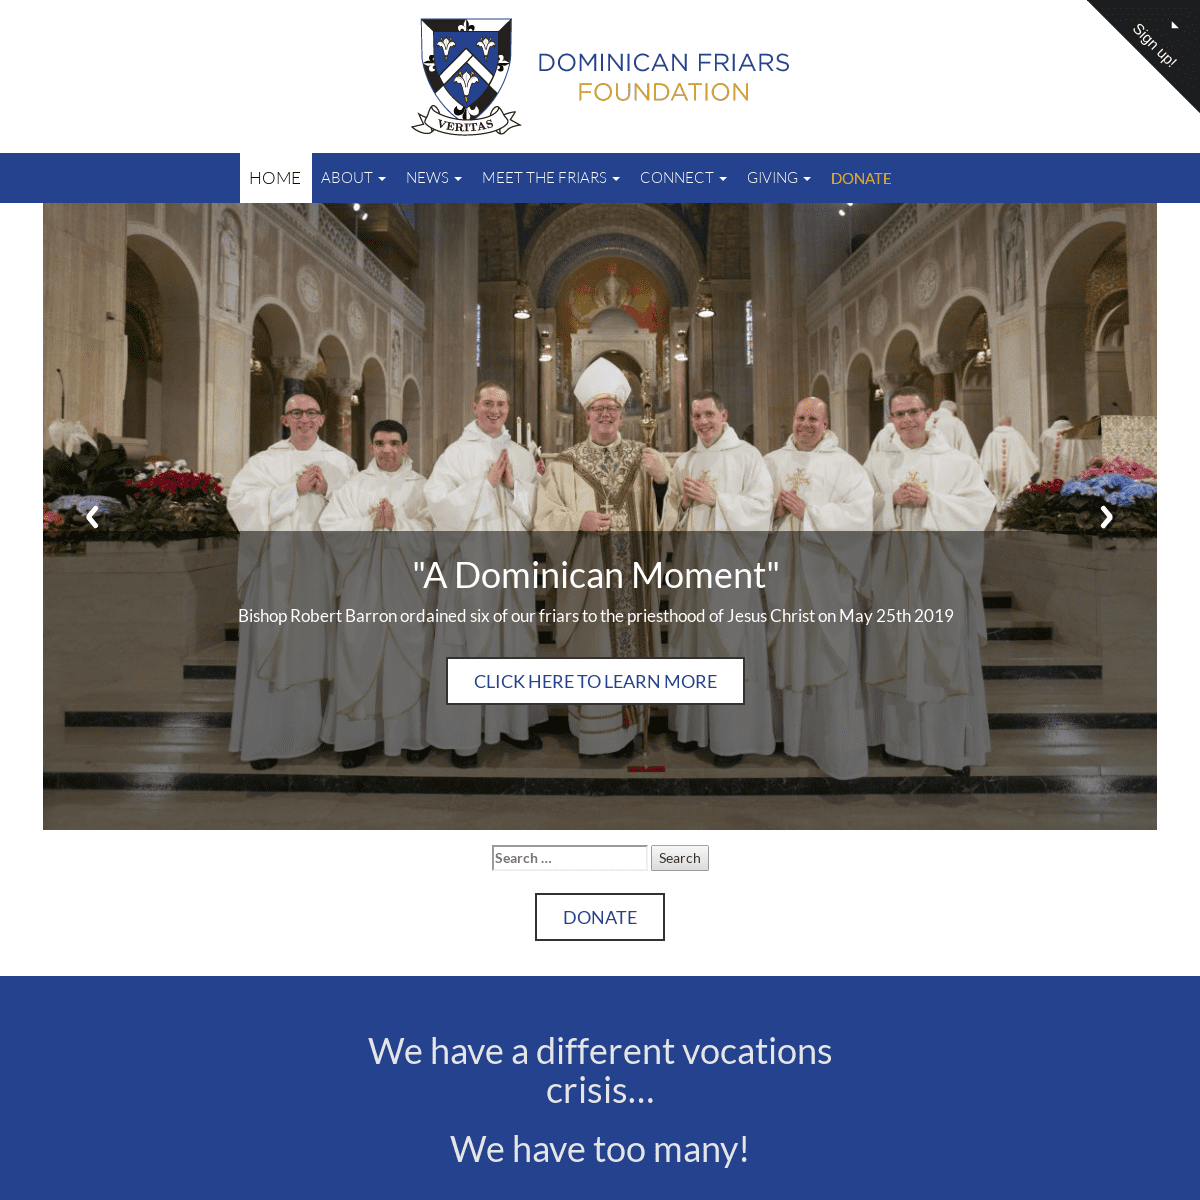 The Dominican Friars Foundation - Welcome